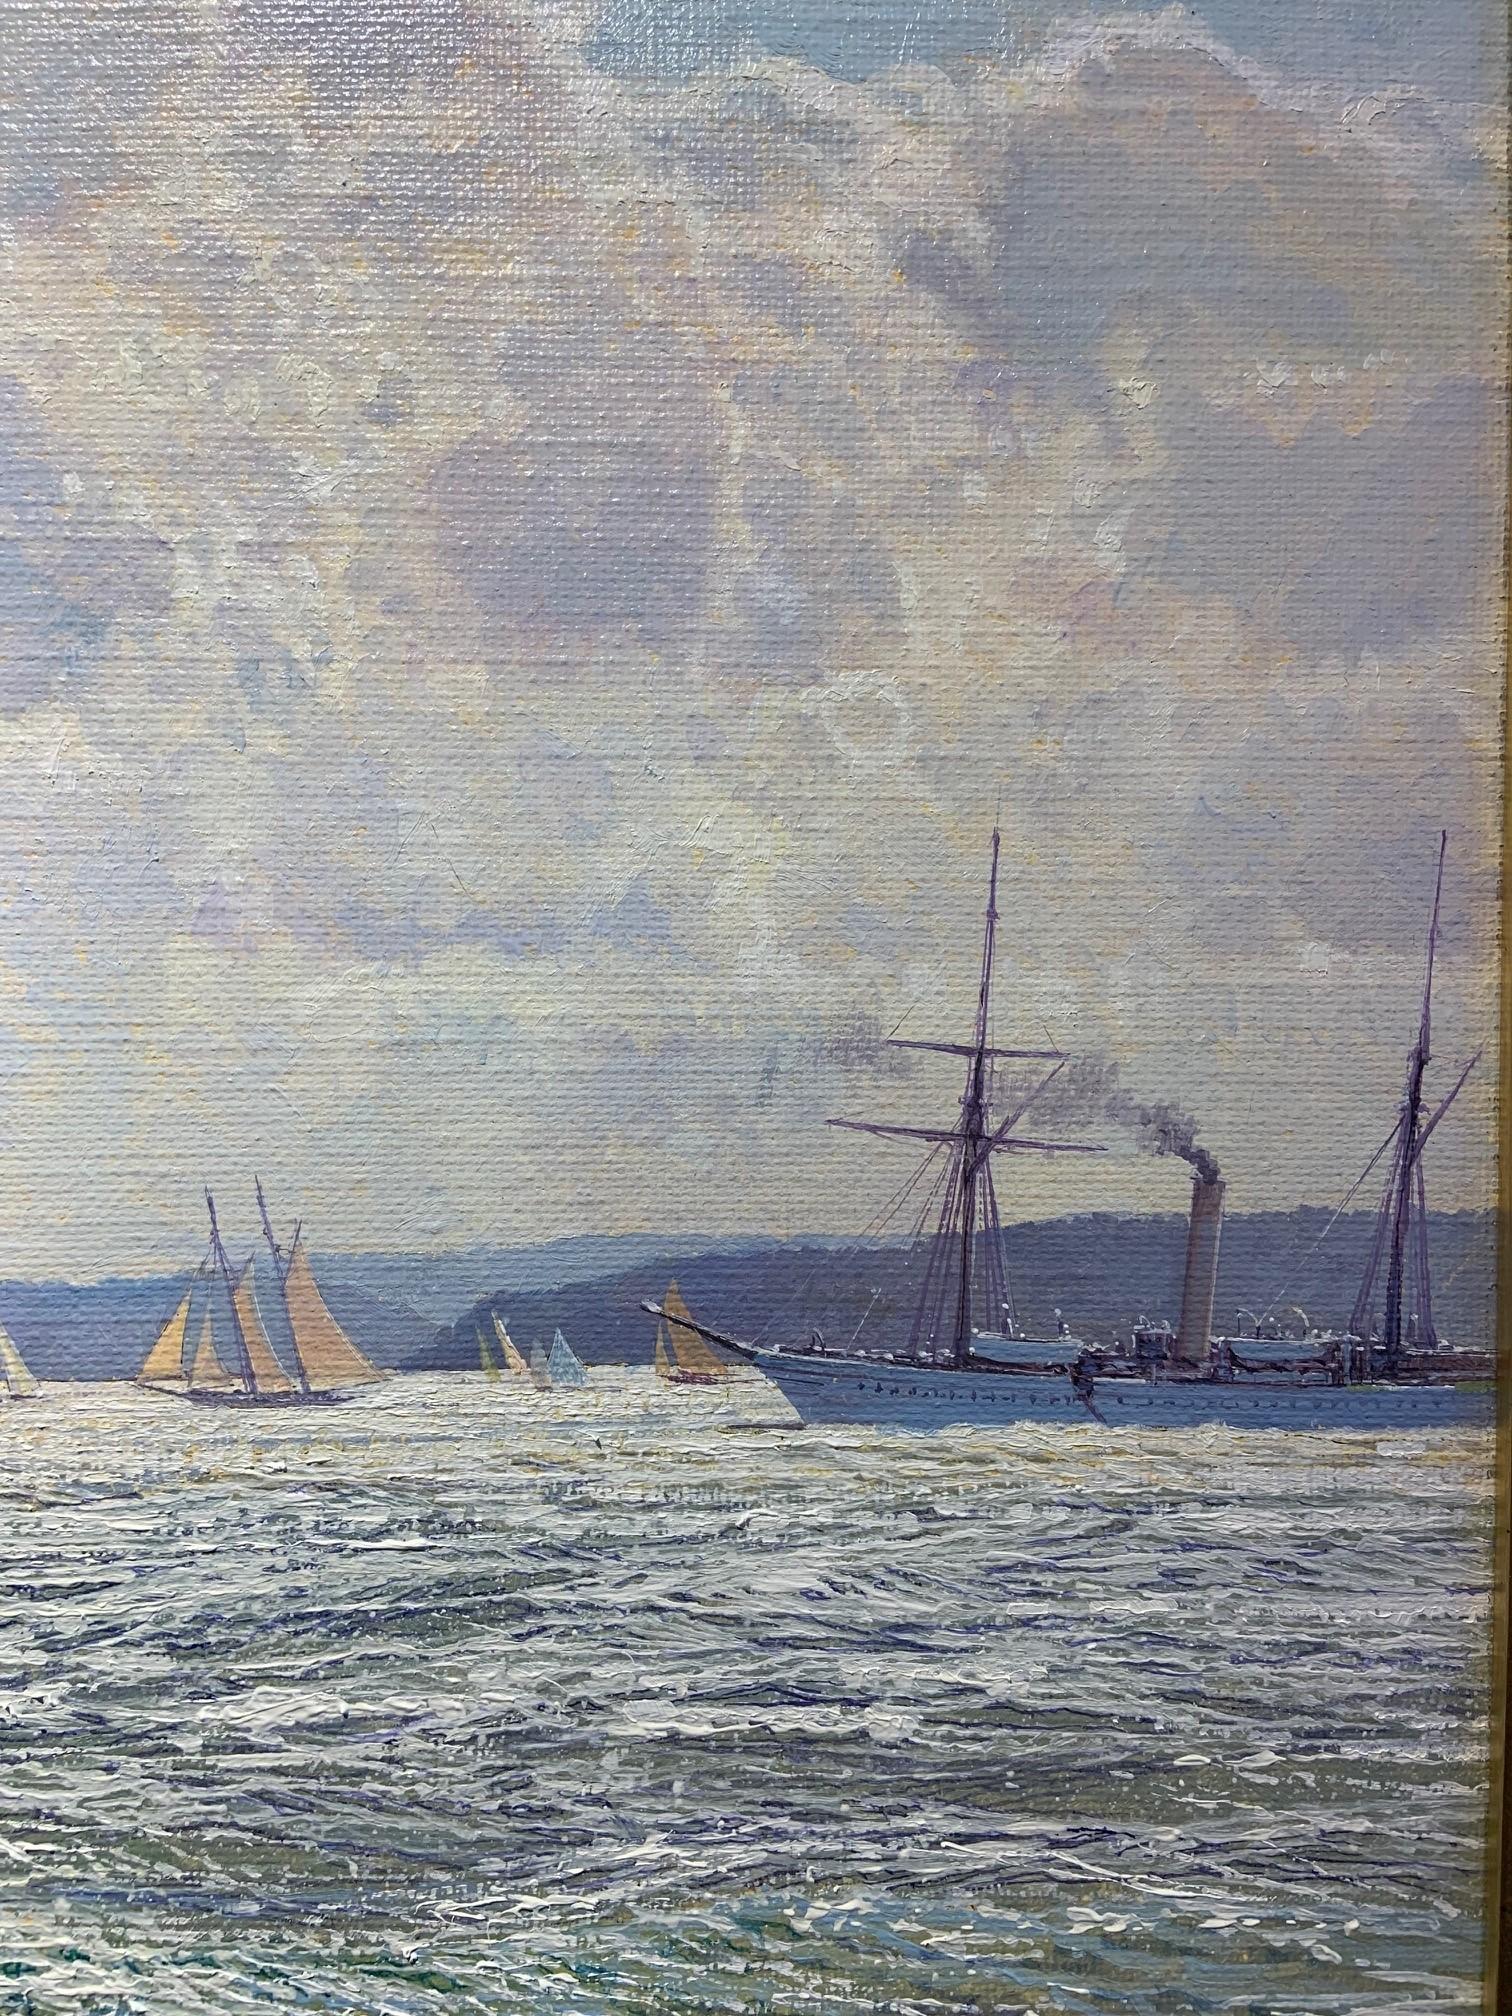 Cowes Week 1926.  We see the yacht White Heather II racing against the Royal Sailing Yacht Britannia. The ships are on a south westerly course. In the distance the Isle of Wight and other yachts can be seen. 
